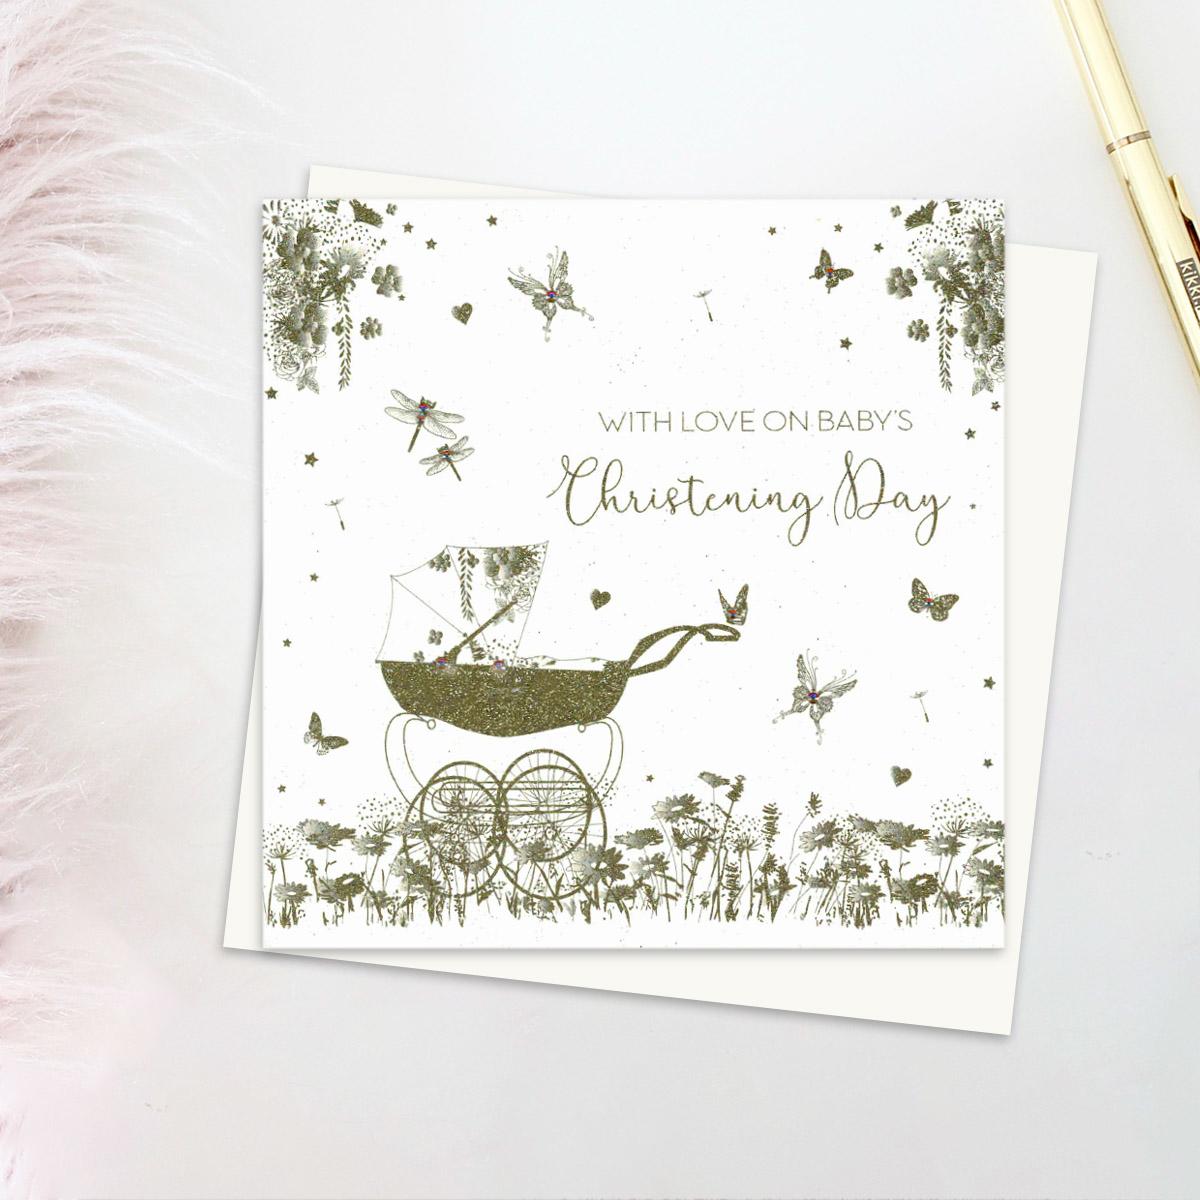 With Love On Baby's Christening Day Card Front Image